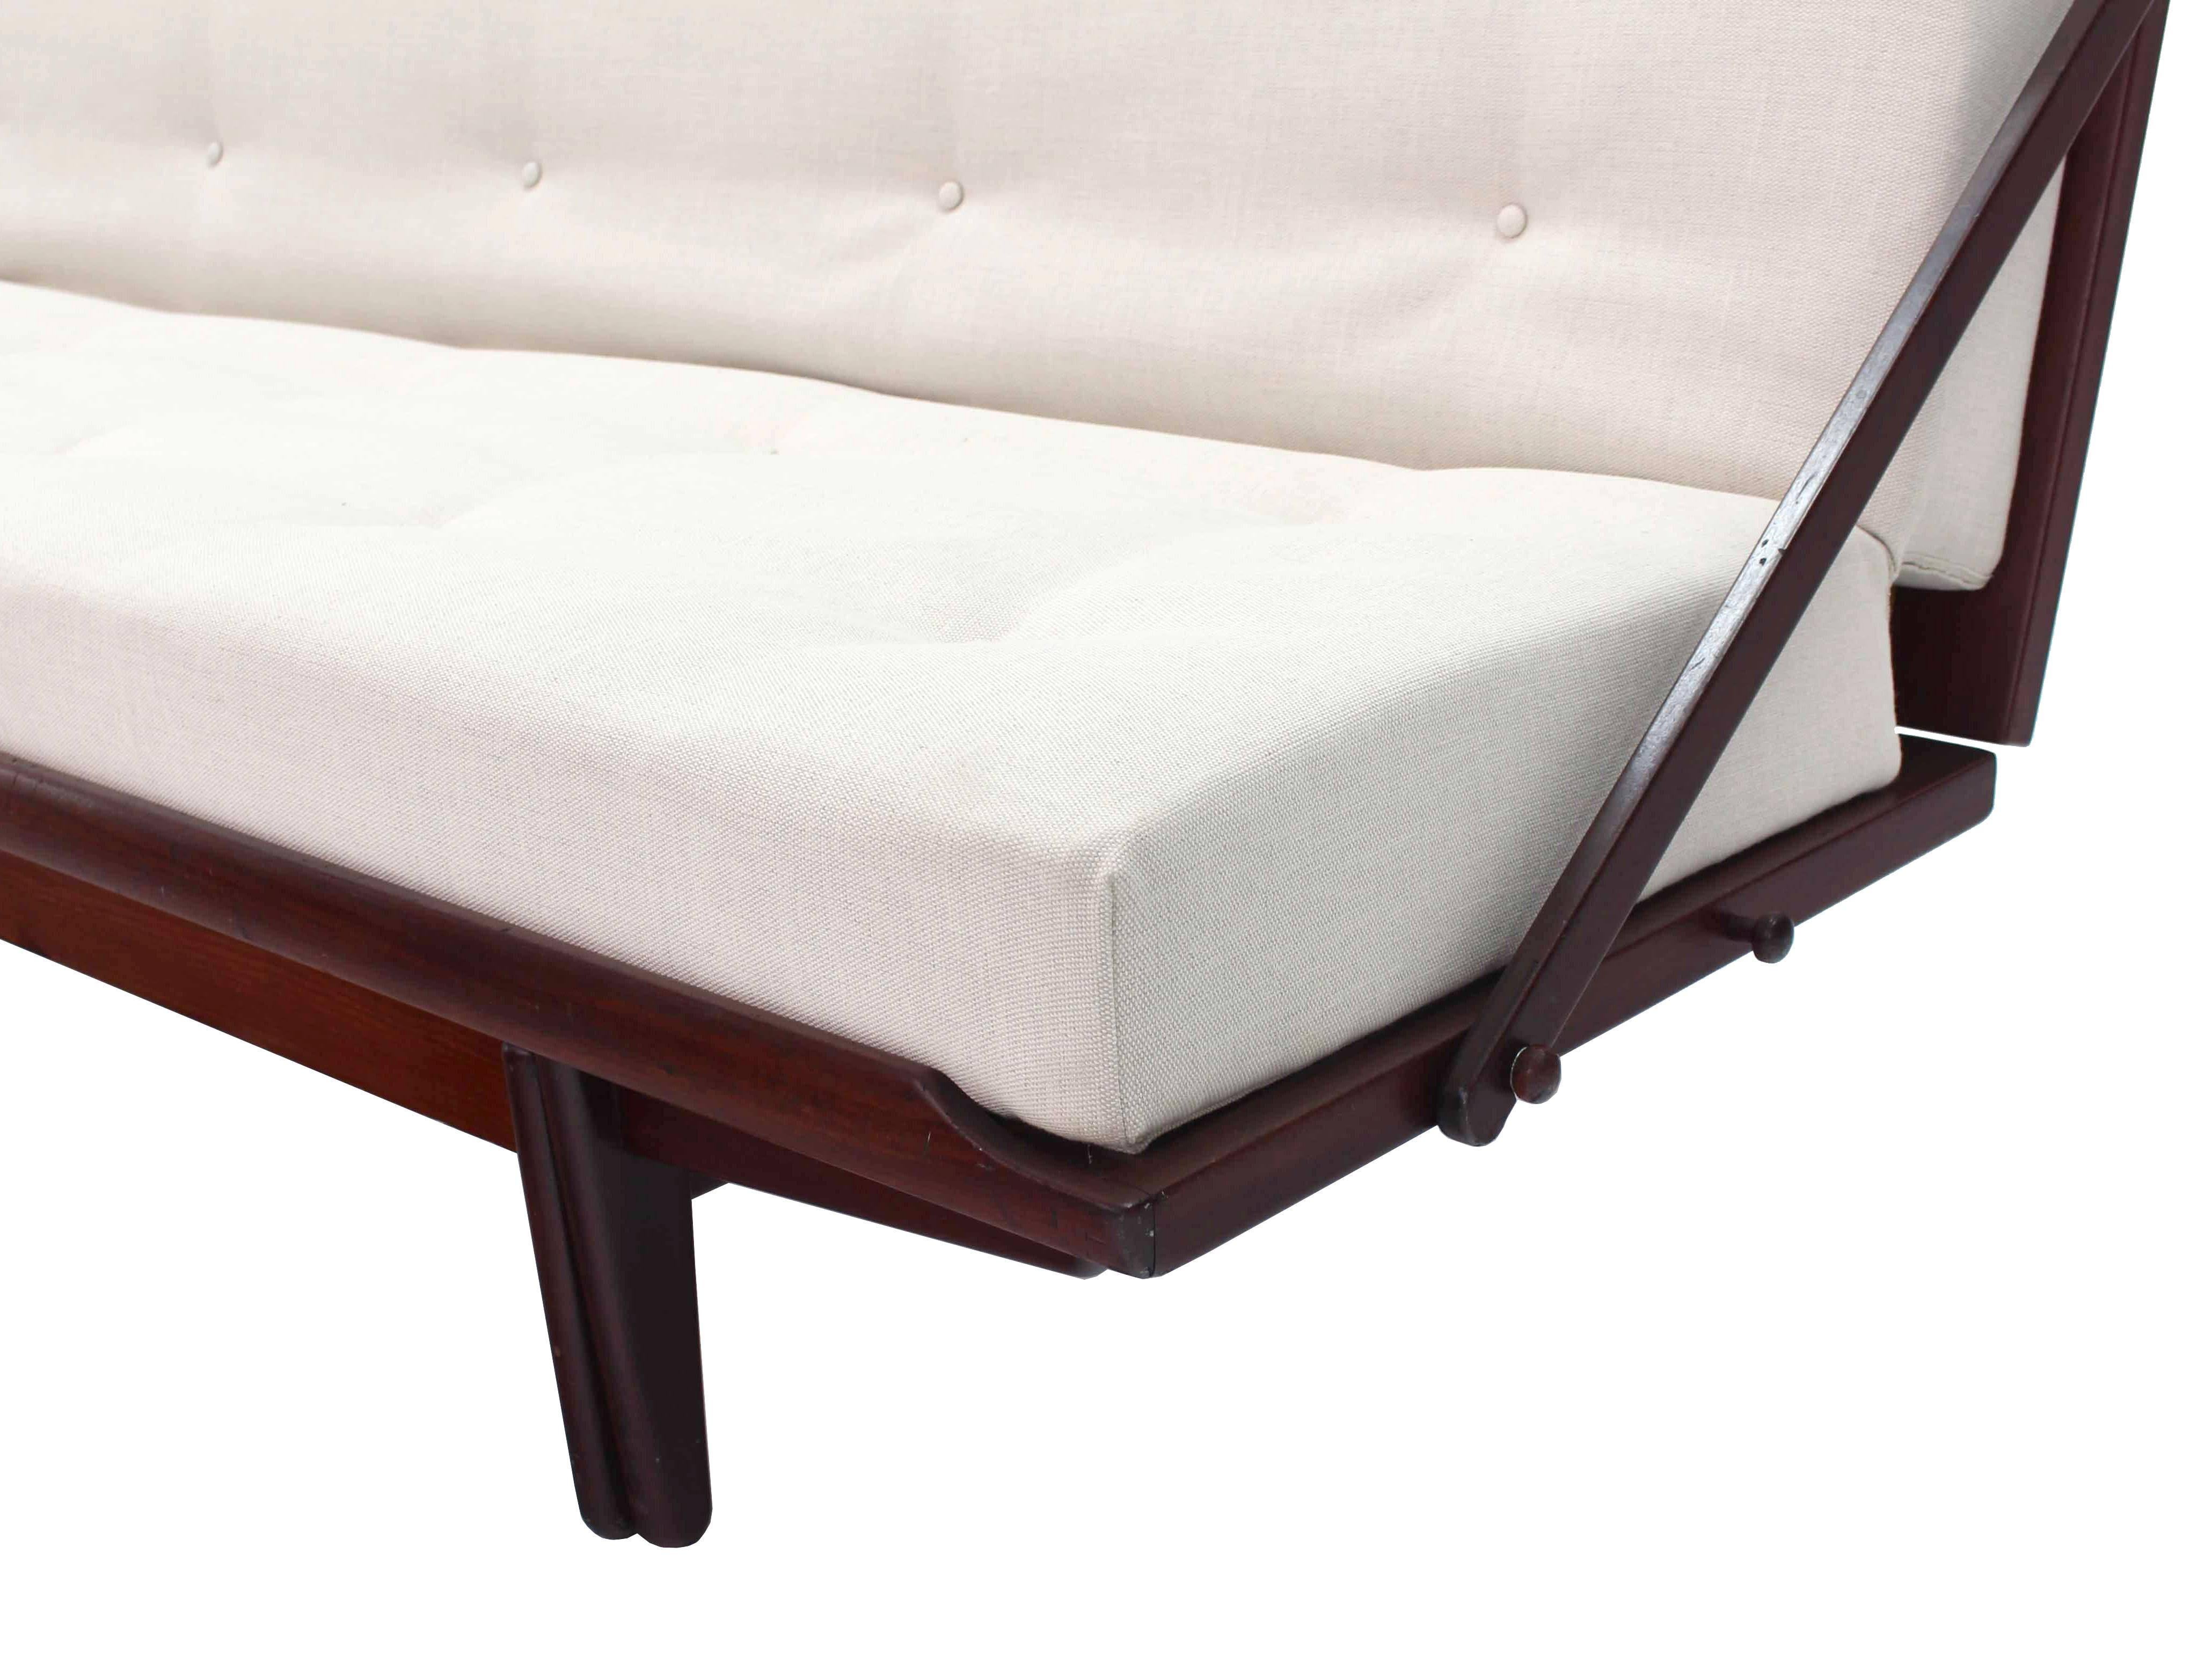 Mid-Century Modern Danish Mid Century Modern Teak Daybed New Upholstery Folding Sofa Couch.